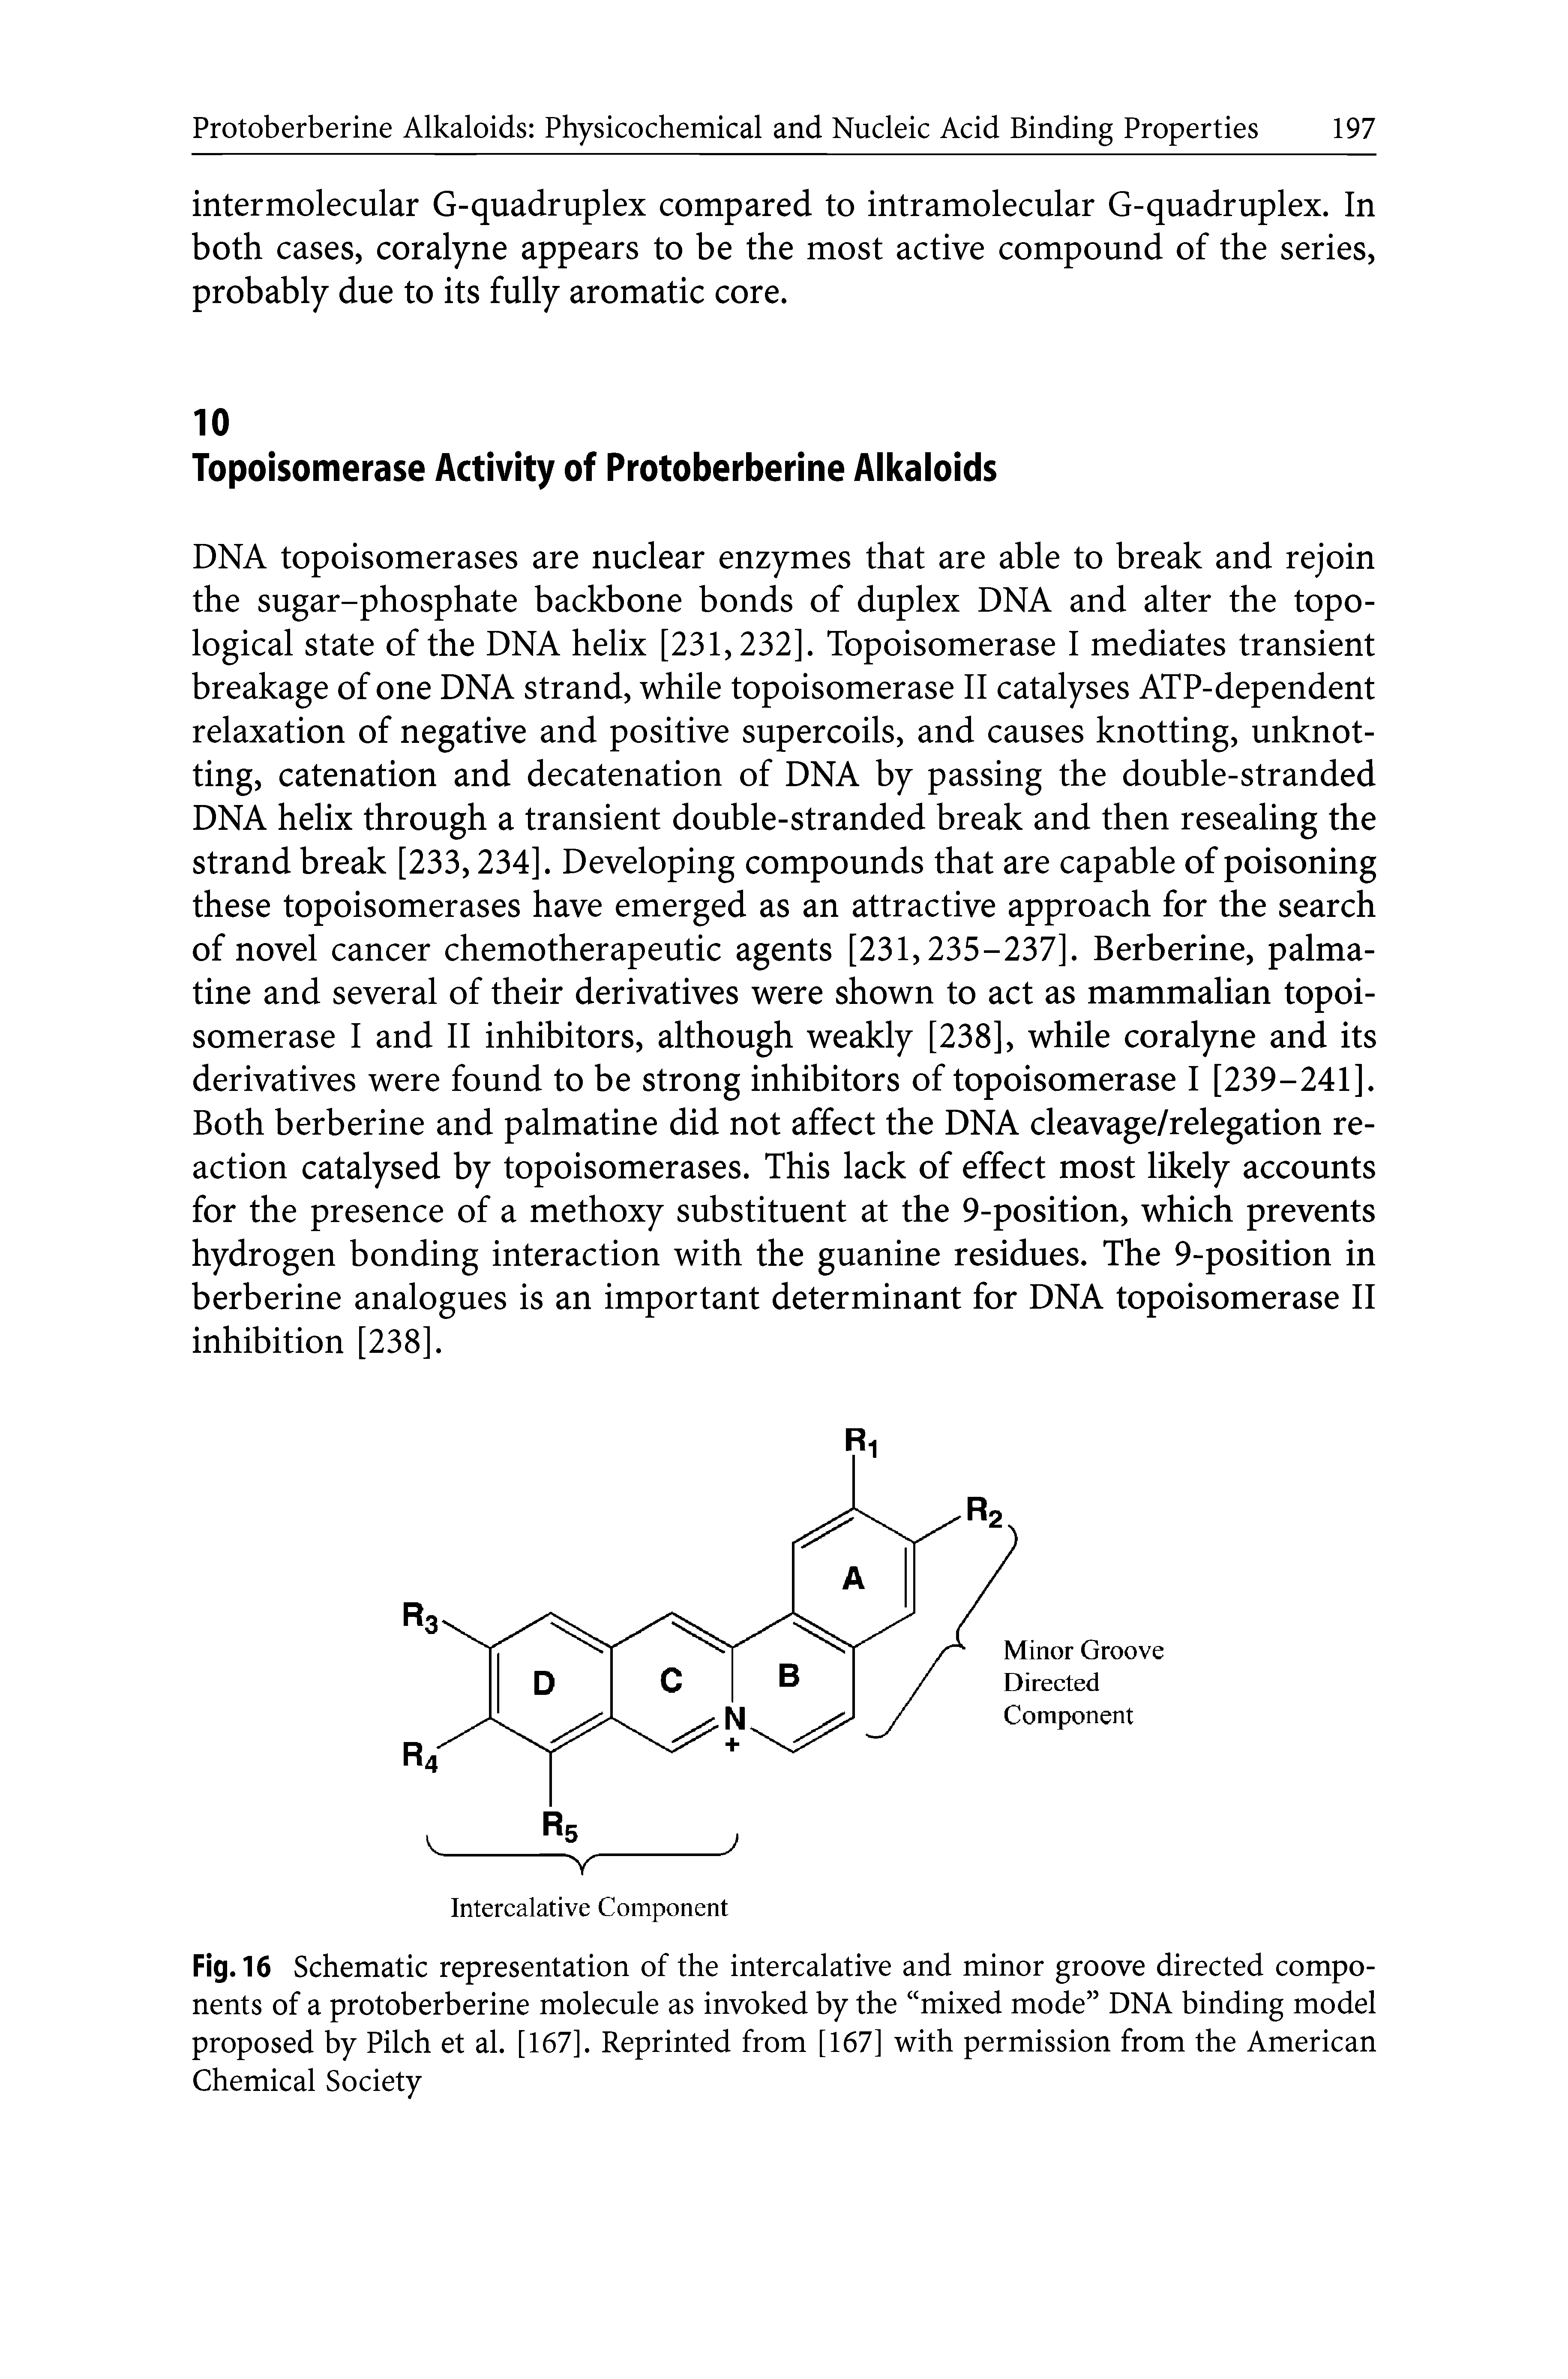 Fig. 16 Schematic representation of the intercalative and minor groove directed components of a protoberberine molecule as invoked by the mixed mode DNA binding model proposed by Pilch et al. [167]. Reprinted from [167] with permission from the American Chemical Society...